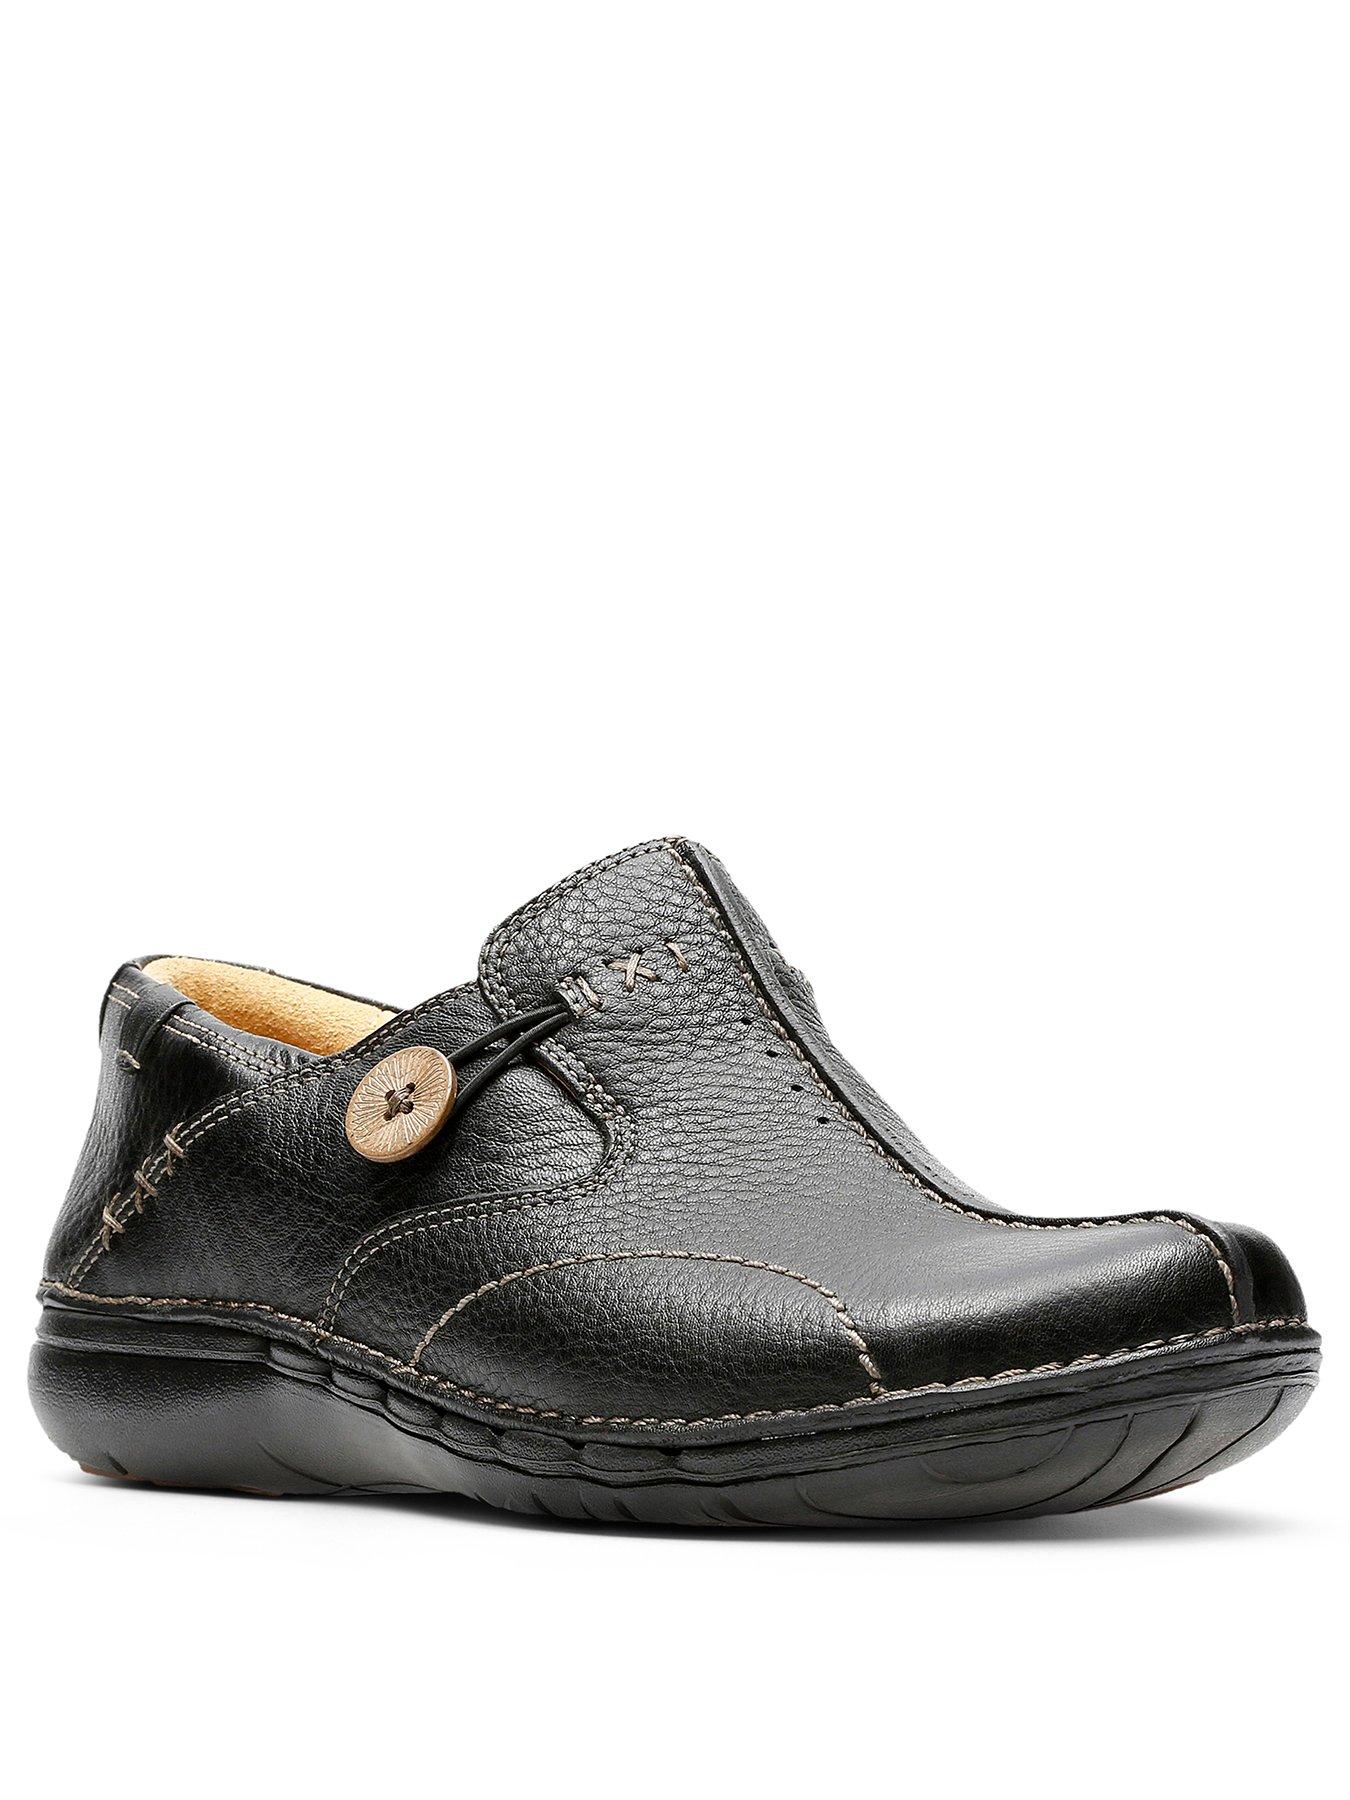 clarks womens wide shoes